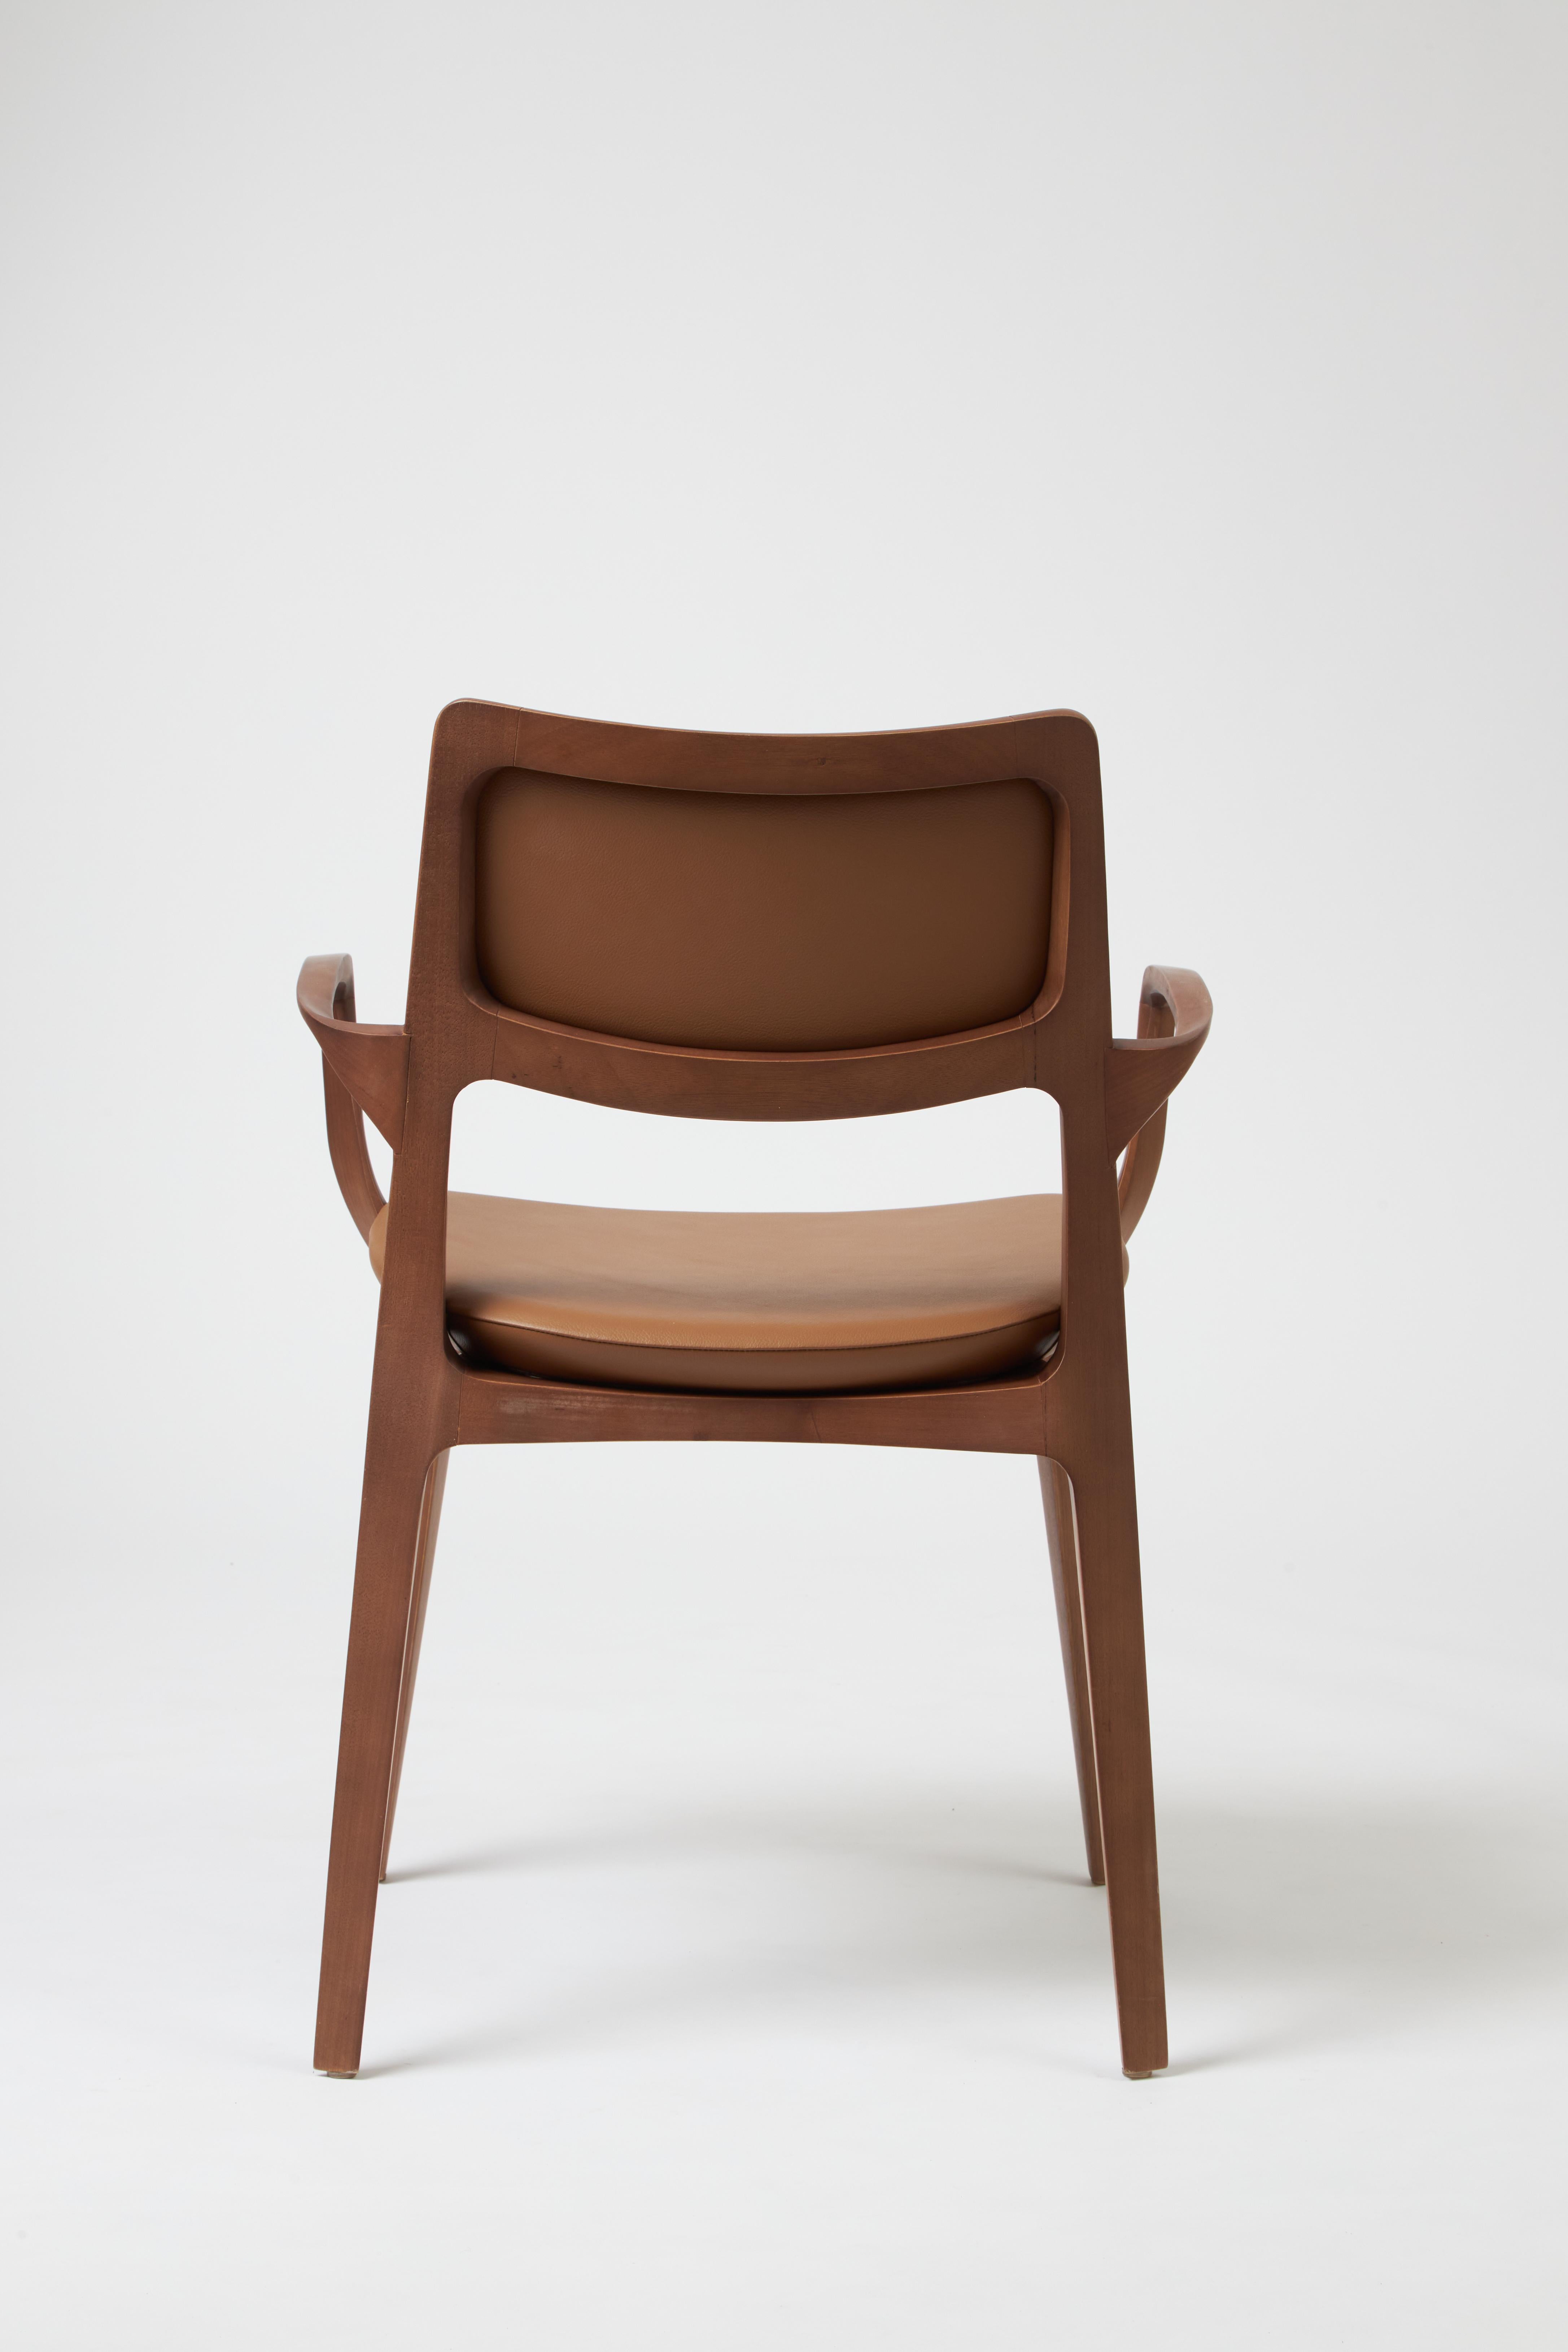 Brazilian Modern Style Aurora Chair Sculpted in Walnut Finish Arms, leather back & seating For Sale